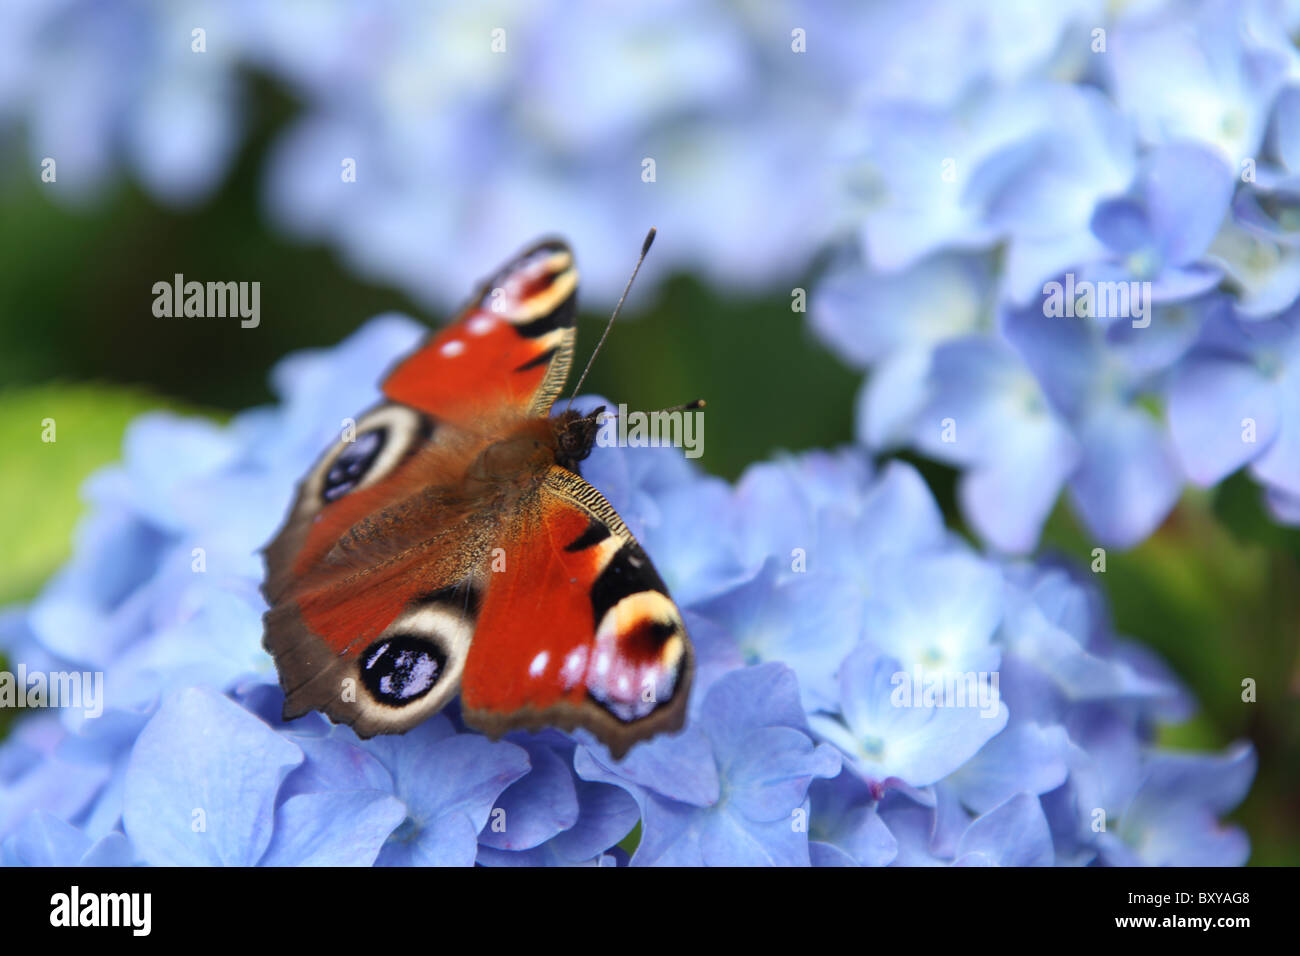 Mount Pleasant Gardens, England. Close up summer view of a European Peacock butterfly feeding on blue hydrangea. Stock Photo